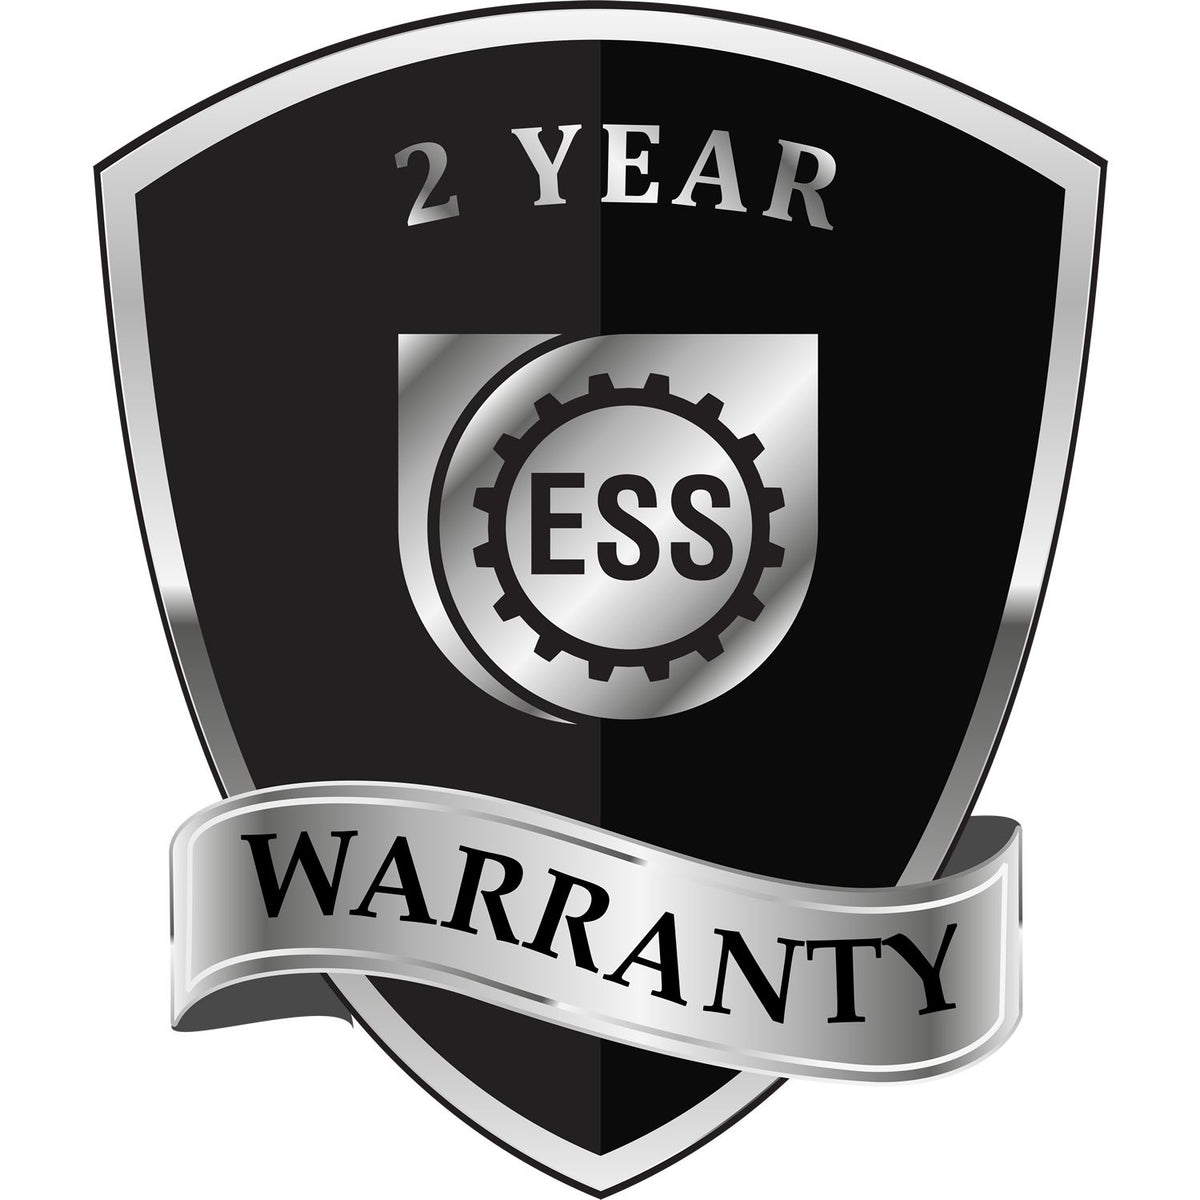 A black and silver badge or emblem showing warranty information for the Hybrid New Jersey Engineer Seal